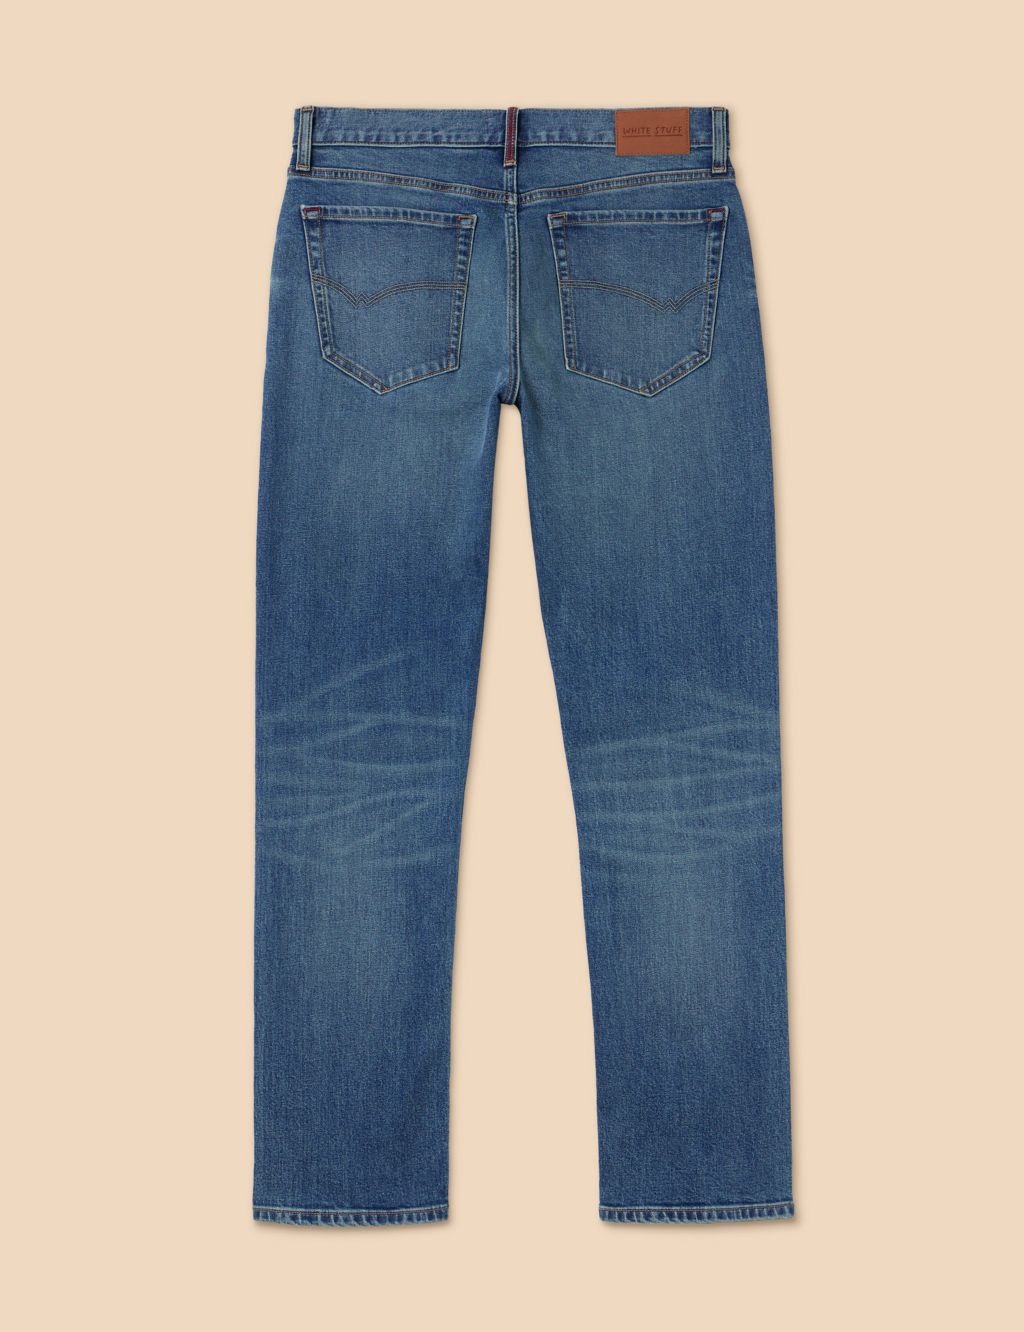 Straight Fit 5 Pocket Jeans image 6